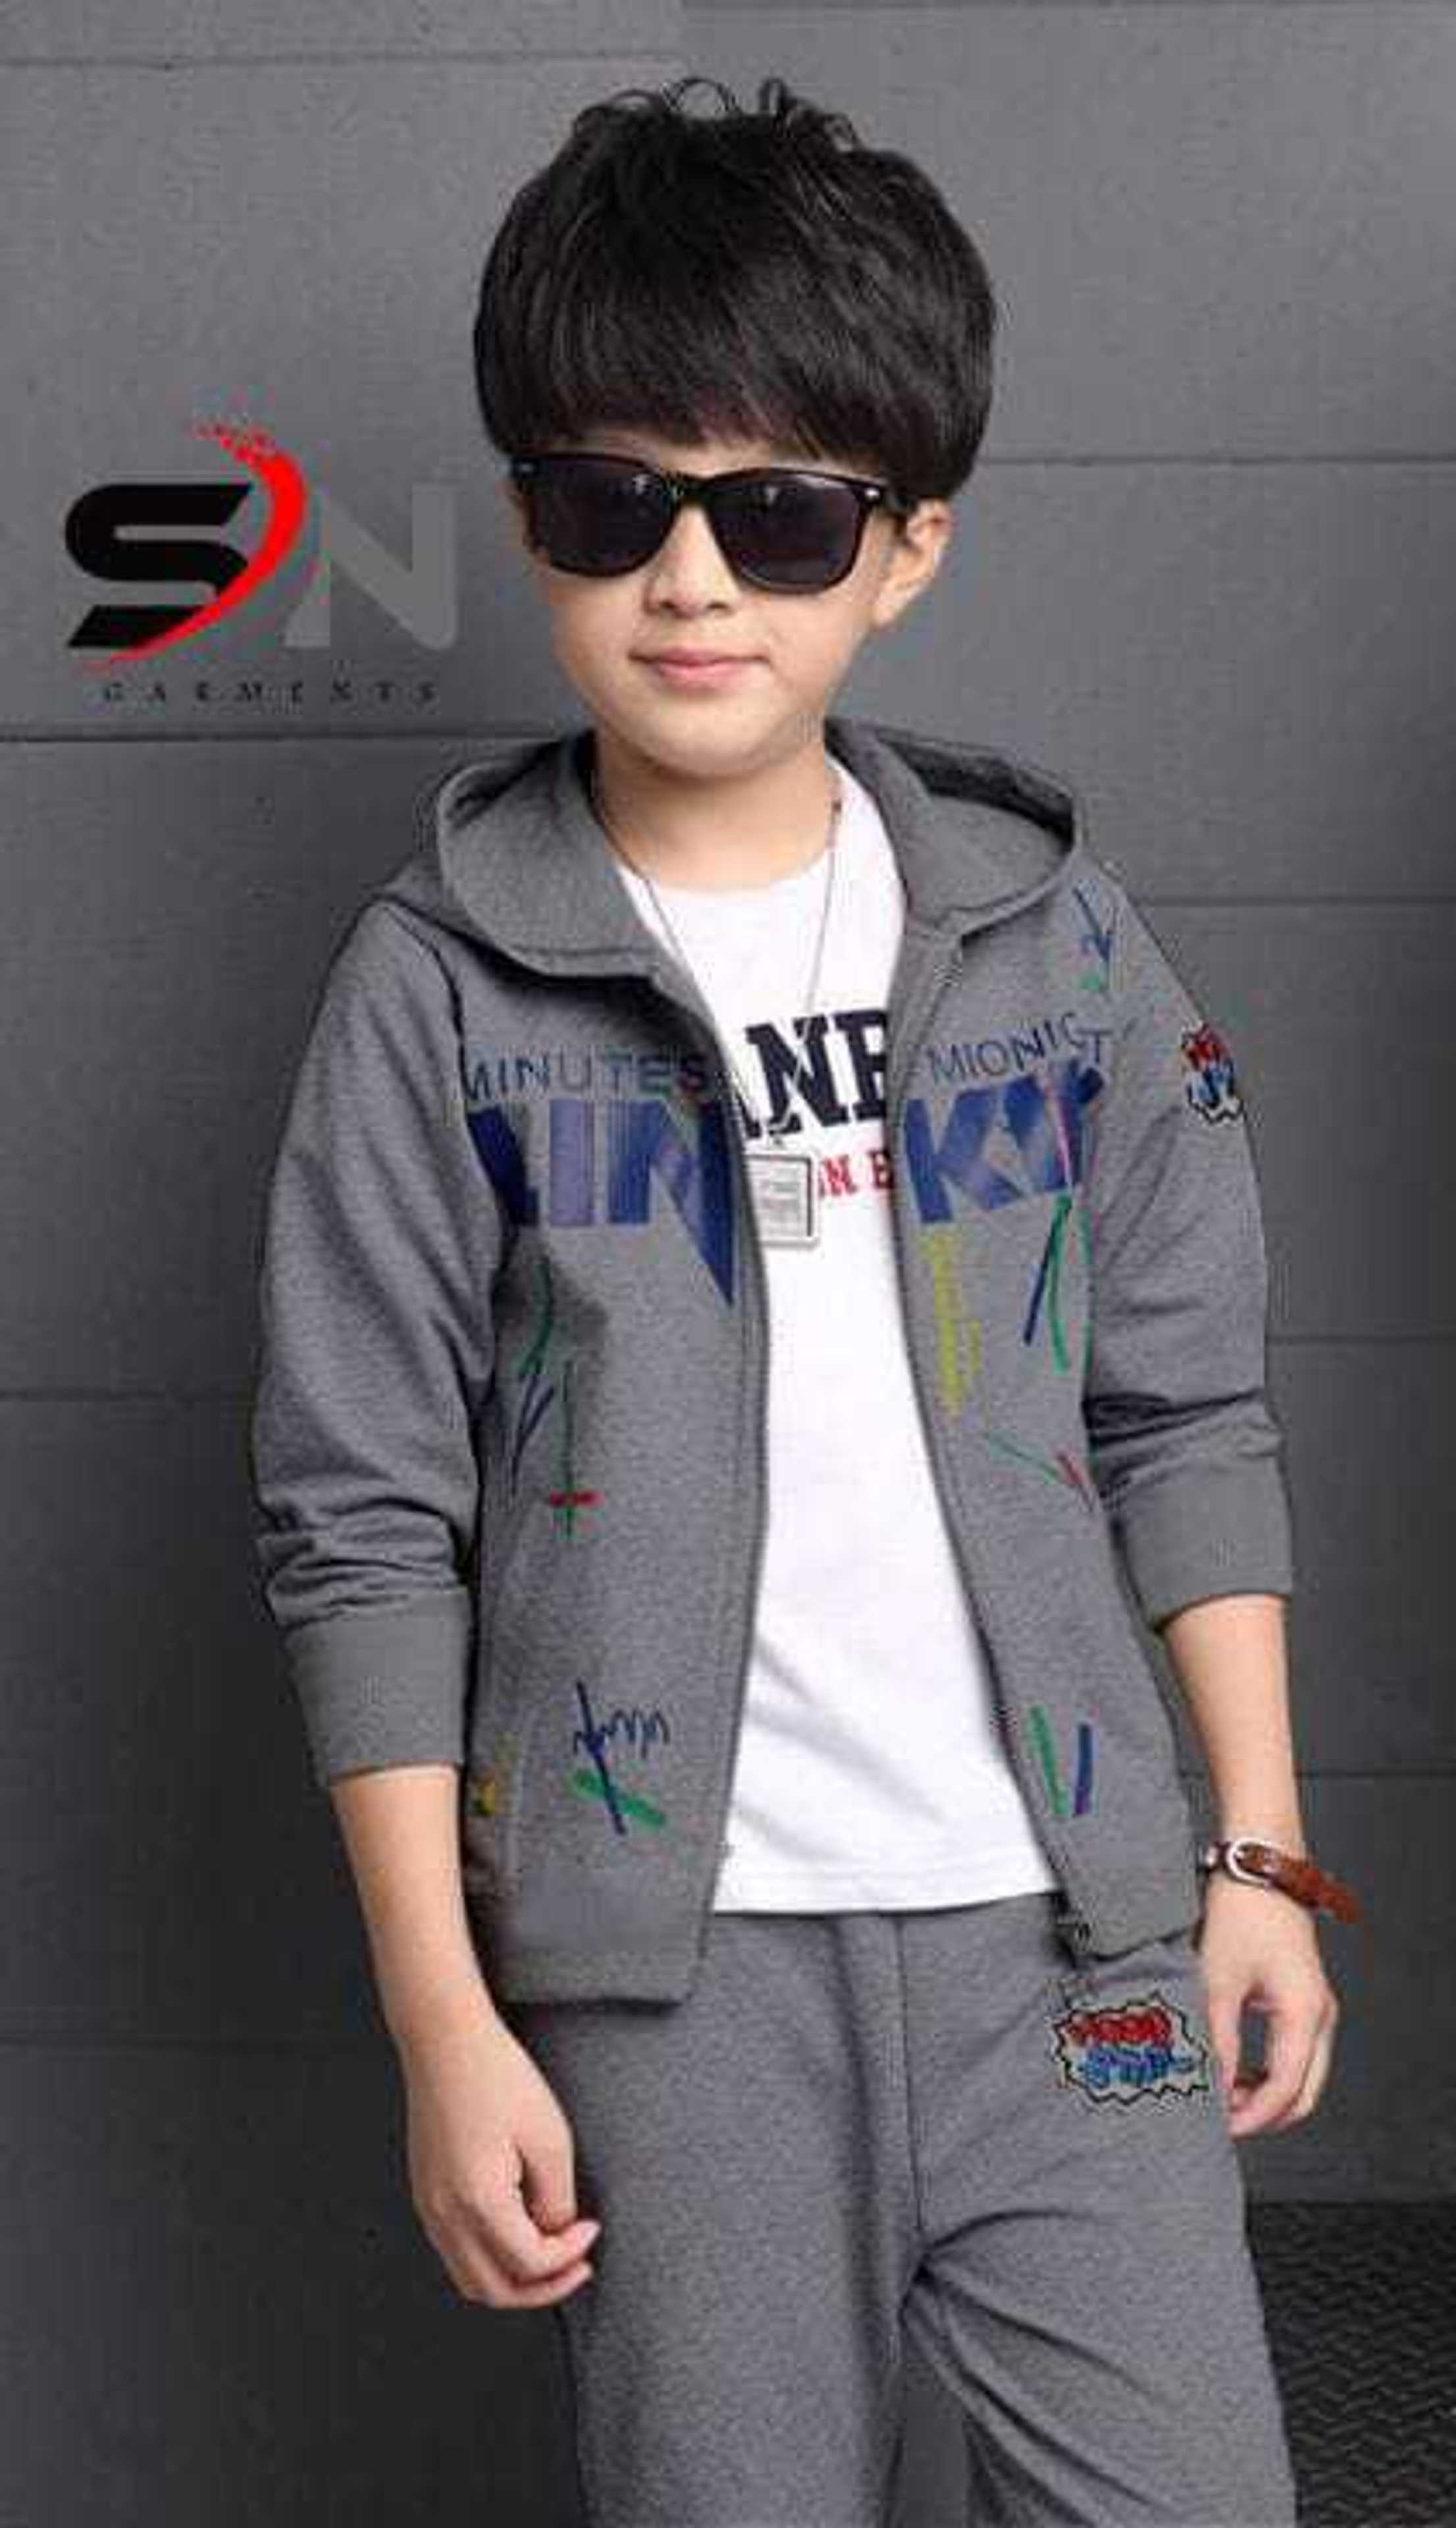 Stylish track suit for kids